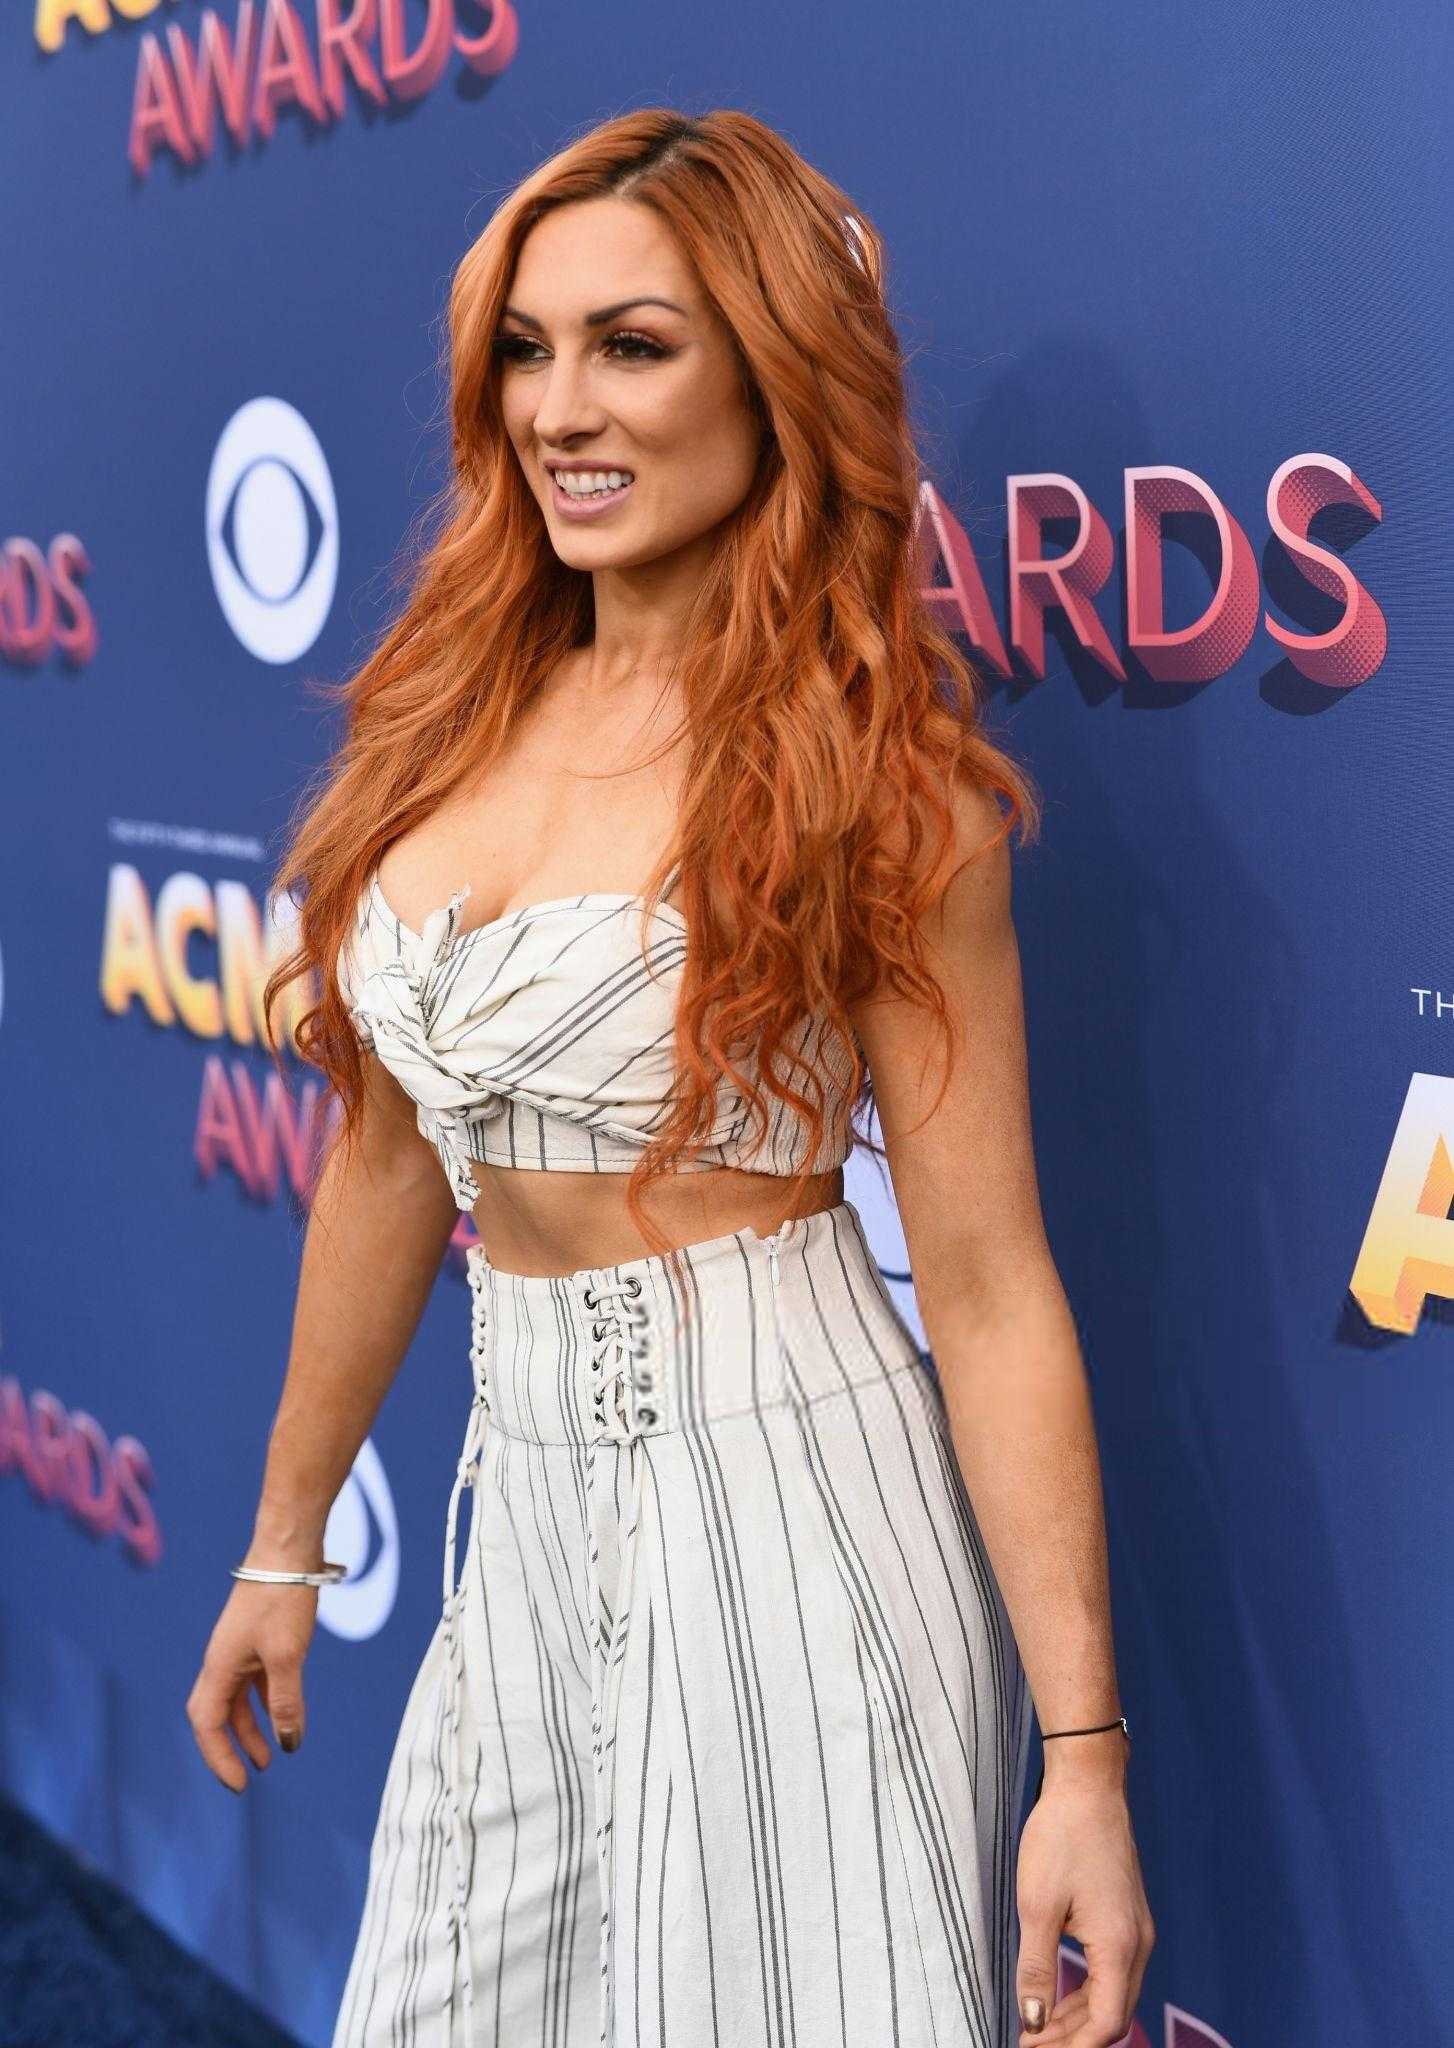 70+ Hot And Sexy Pictures of Becky Lynch – WWE Diva Will Sizzle You Up 132